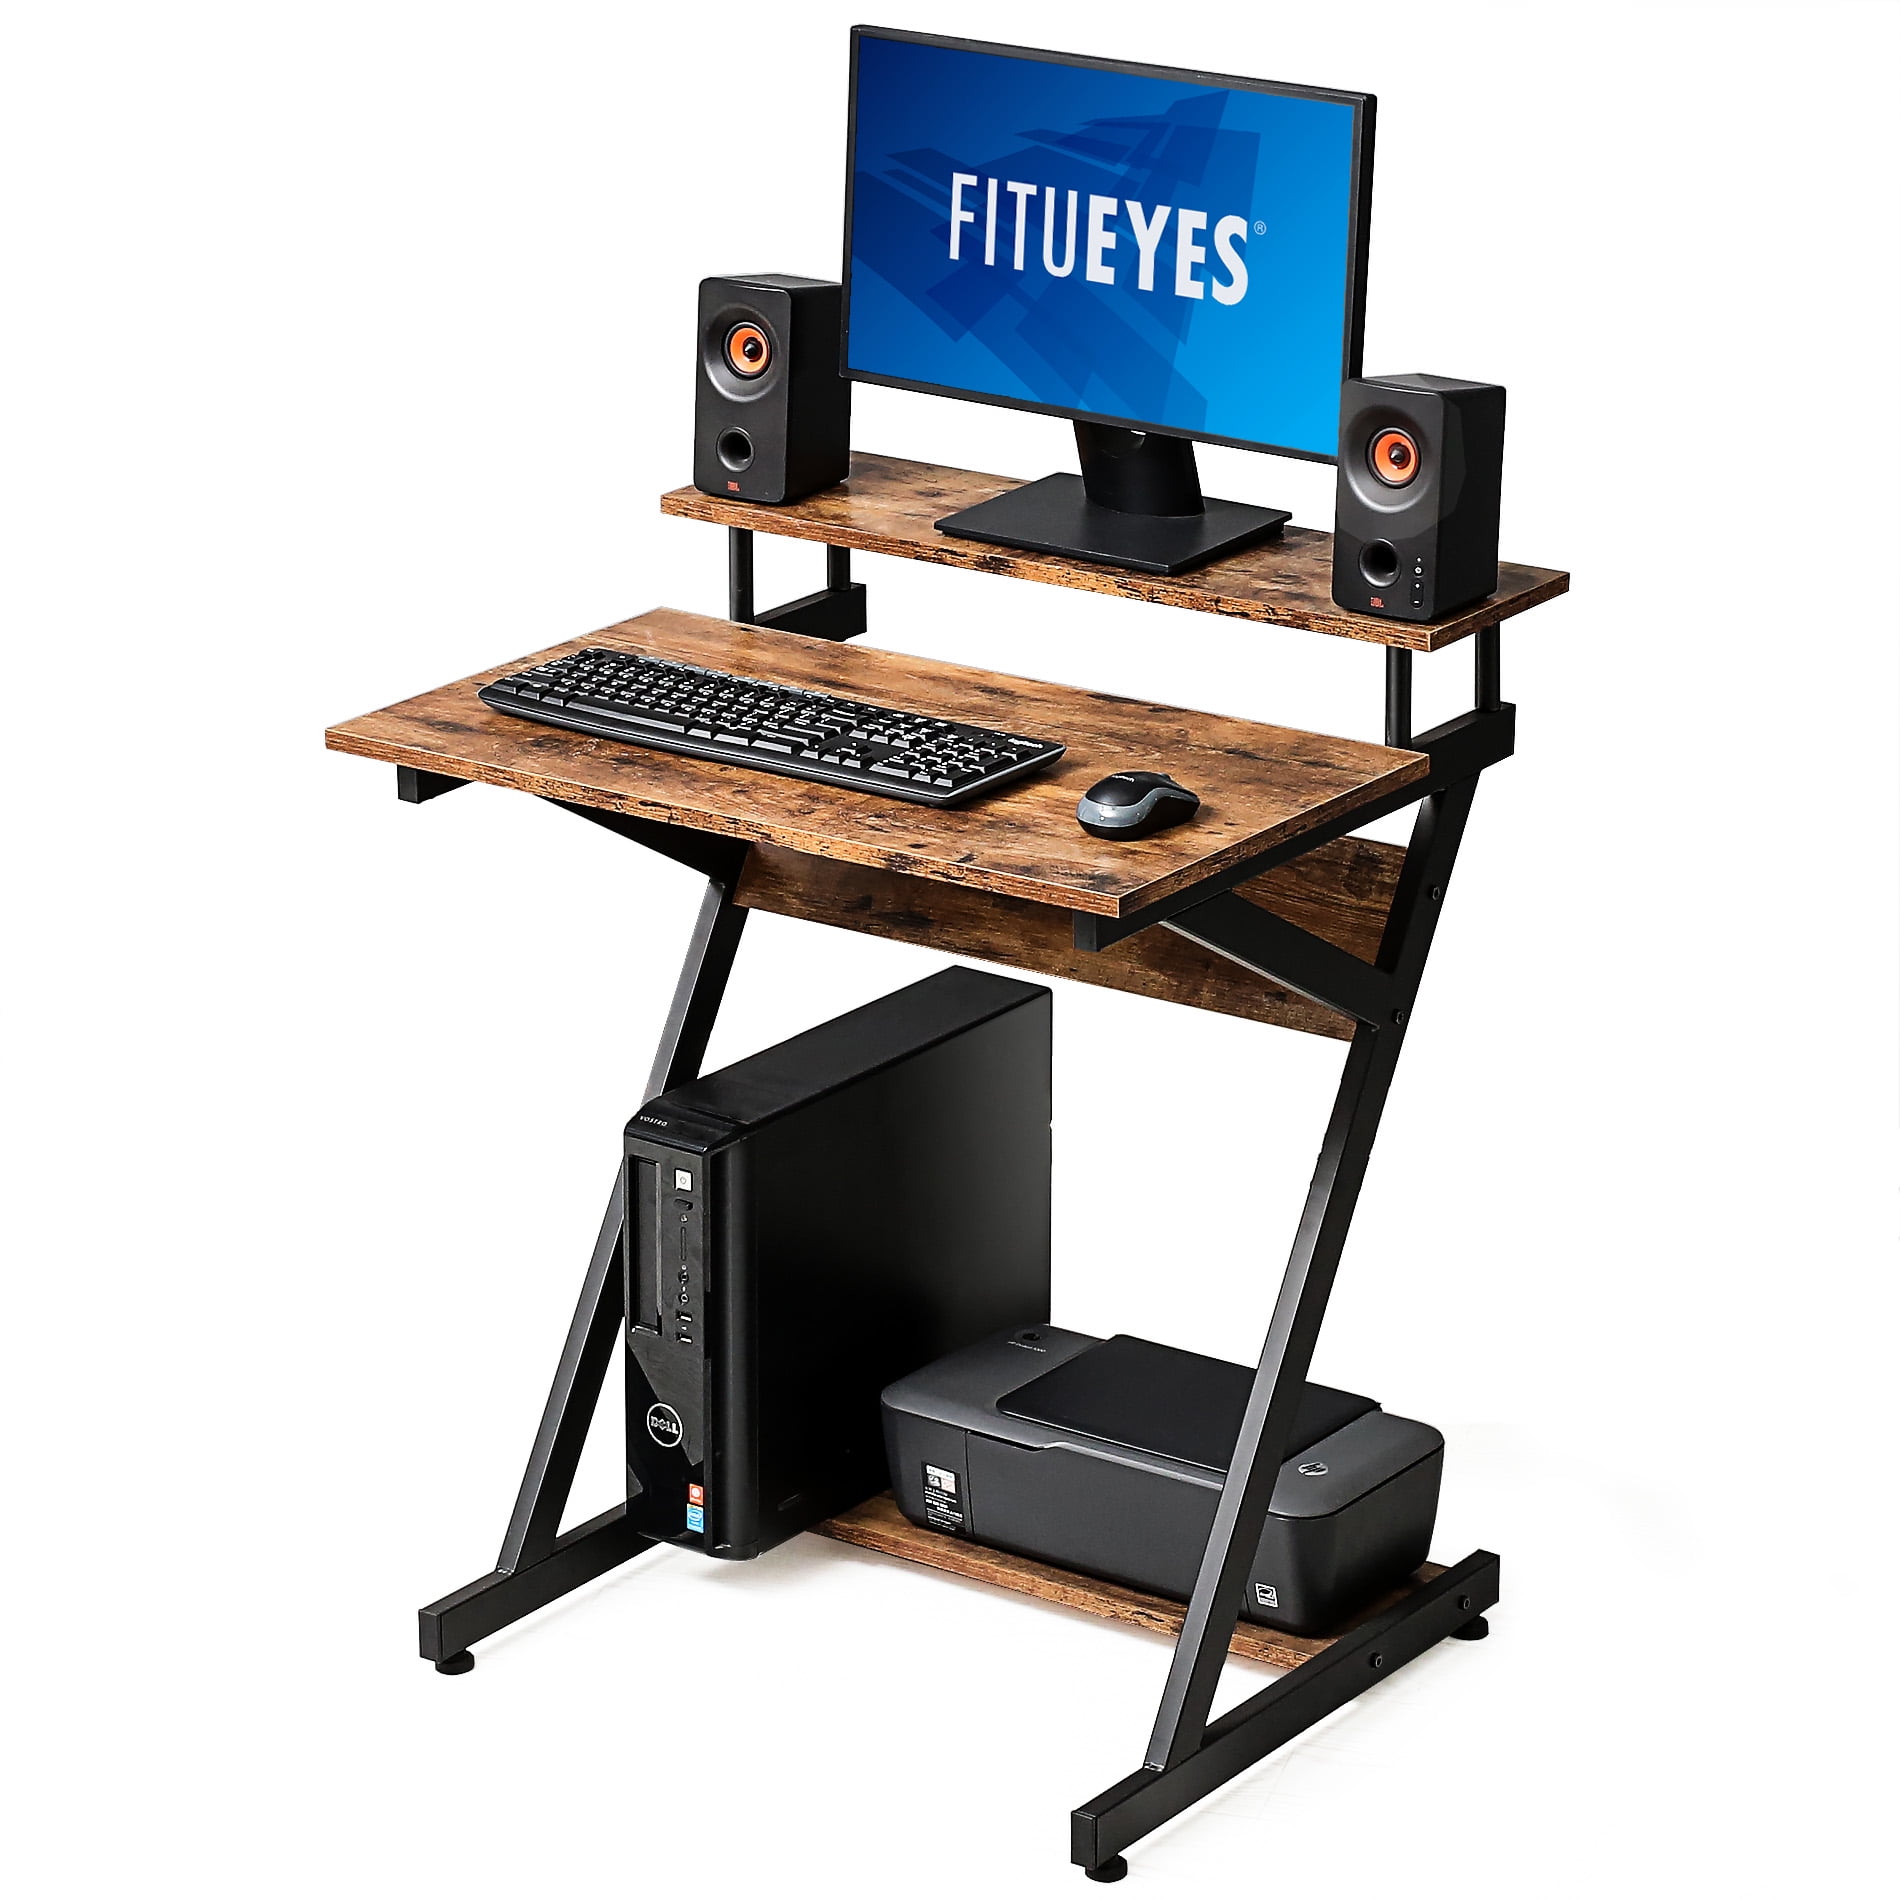 FITUEYES Computer Desk with Monitor Shelf Corner Study Writing Desk for